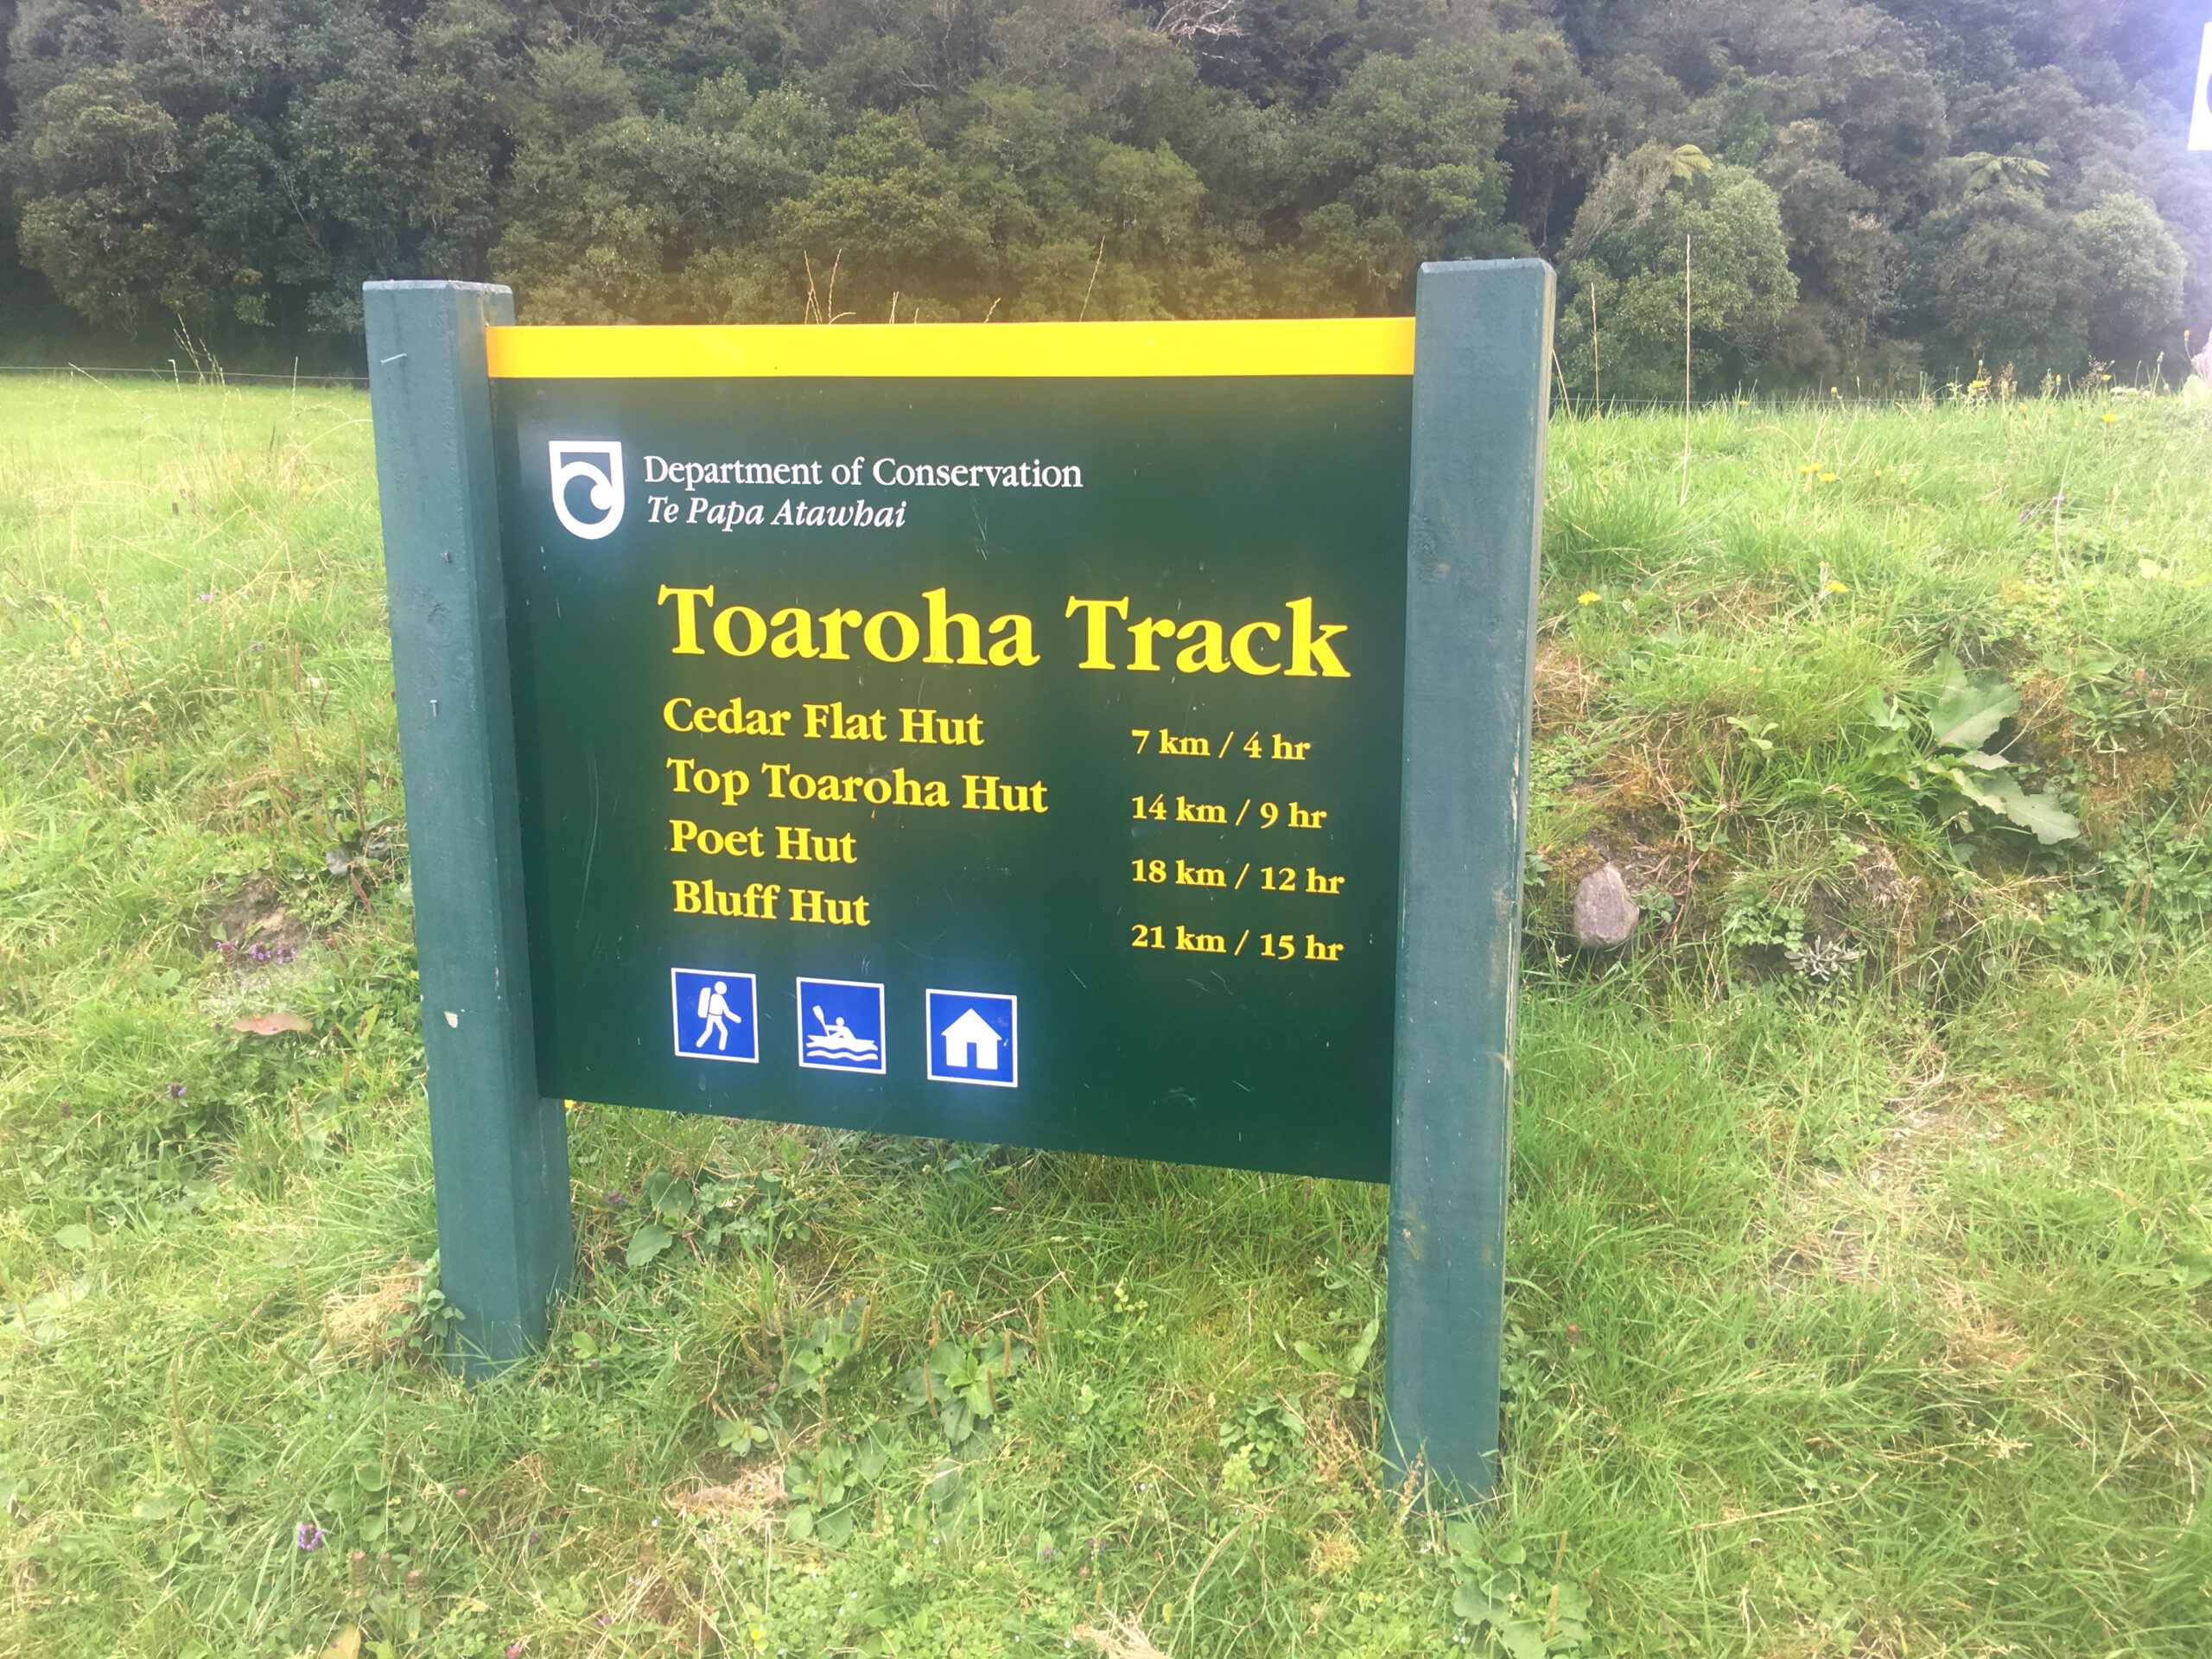 A sign providers hikers with time estimates for the Toaroha Track.